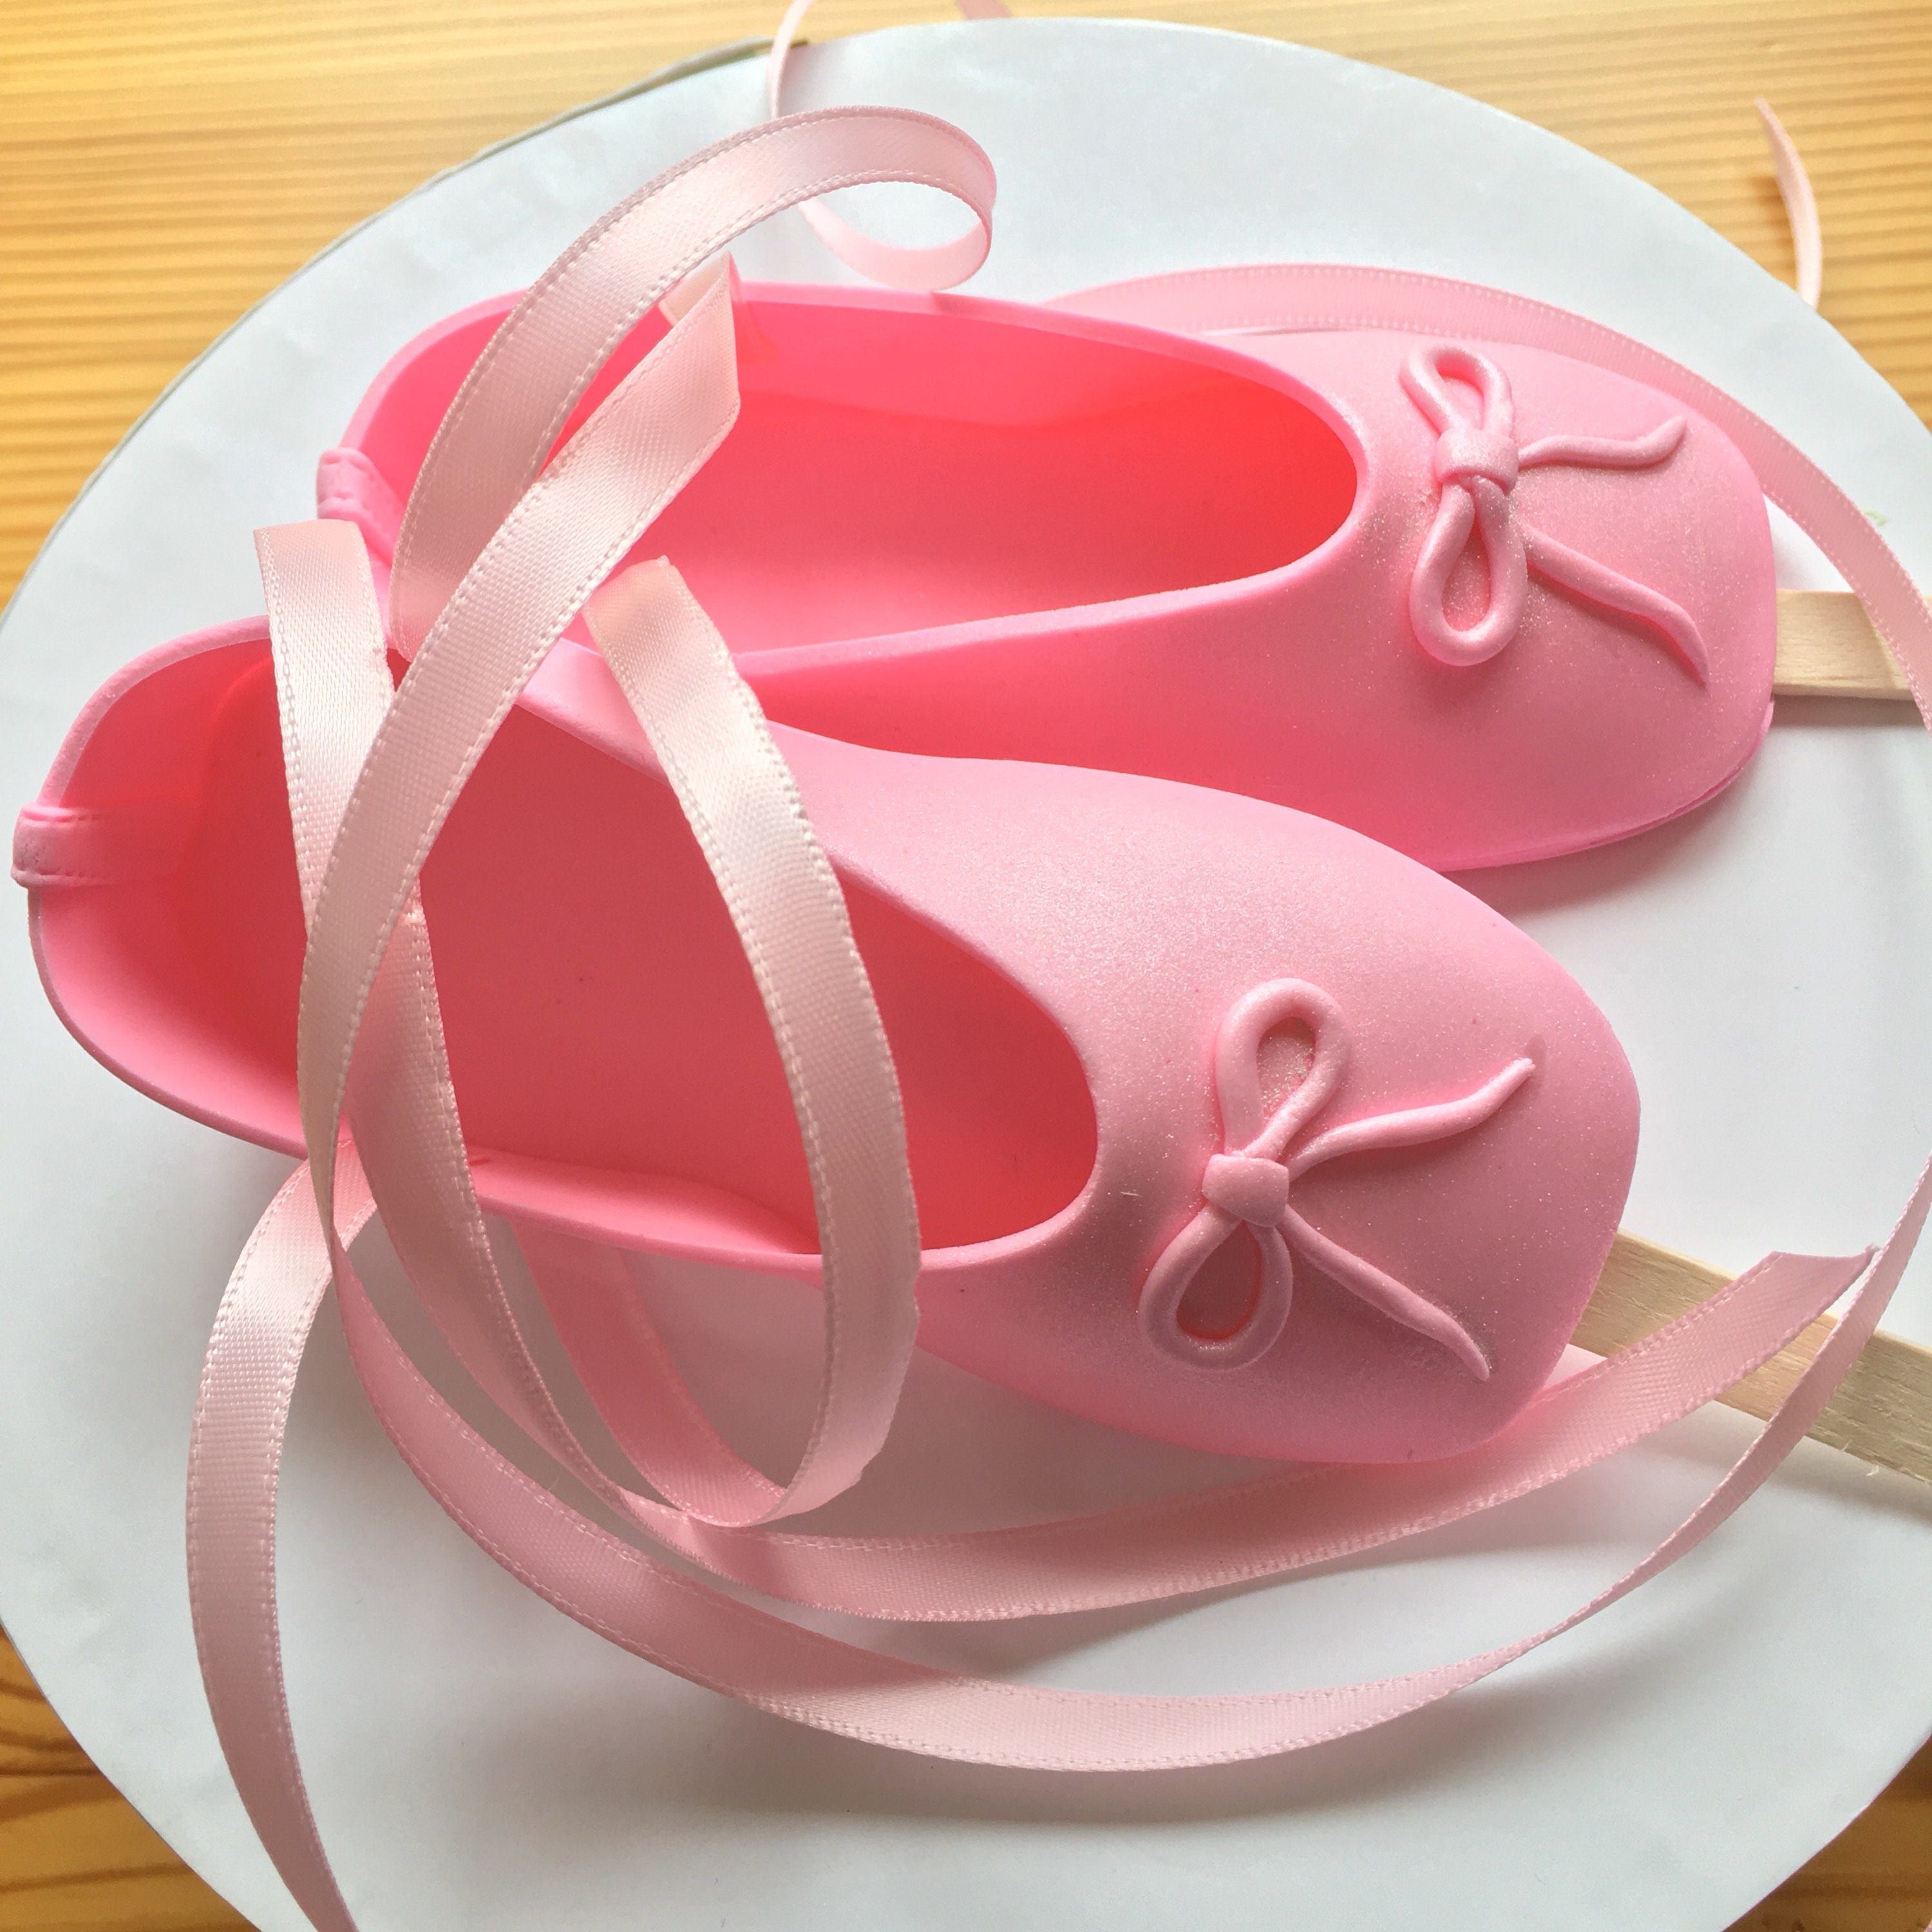 Custom Edible Pink Ballet Slippers Ballerina Shoes With Sticks Etsy